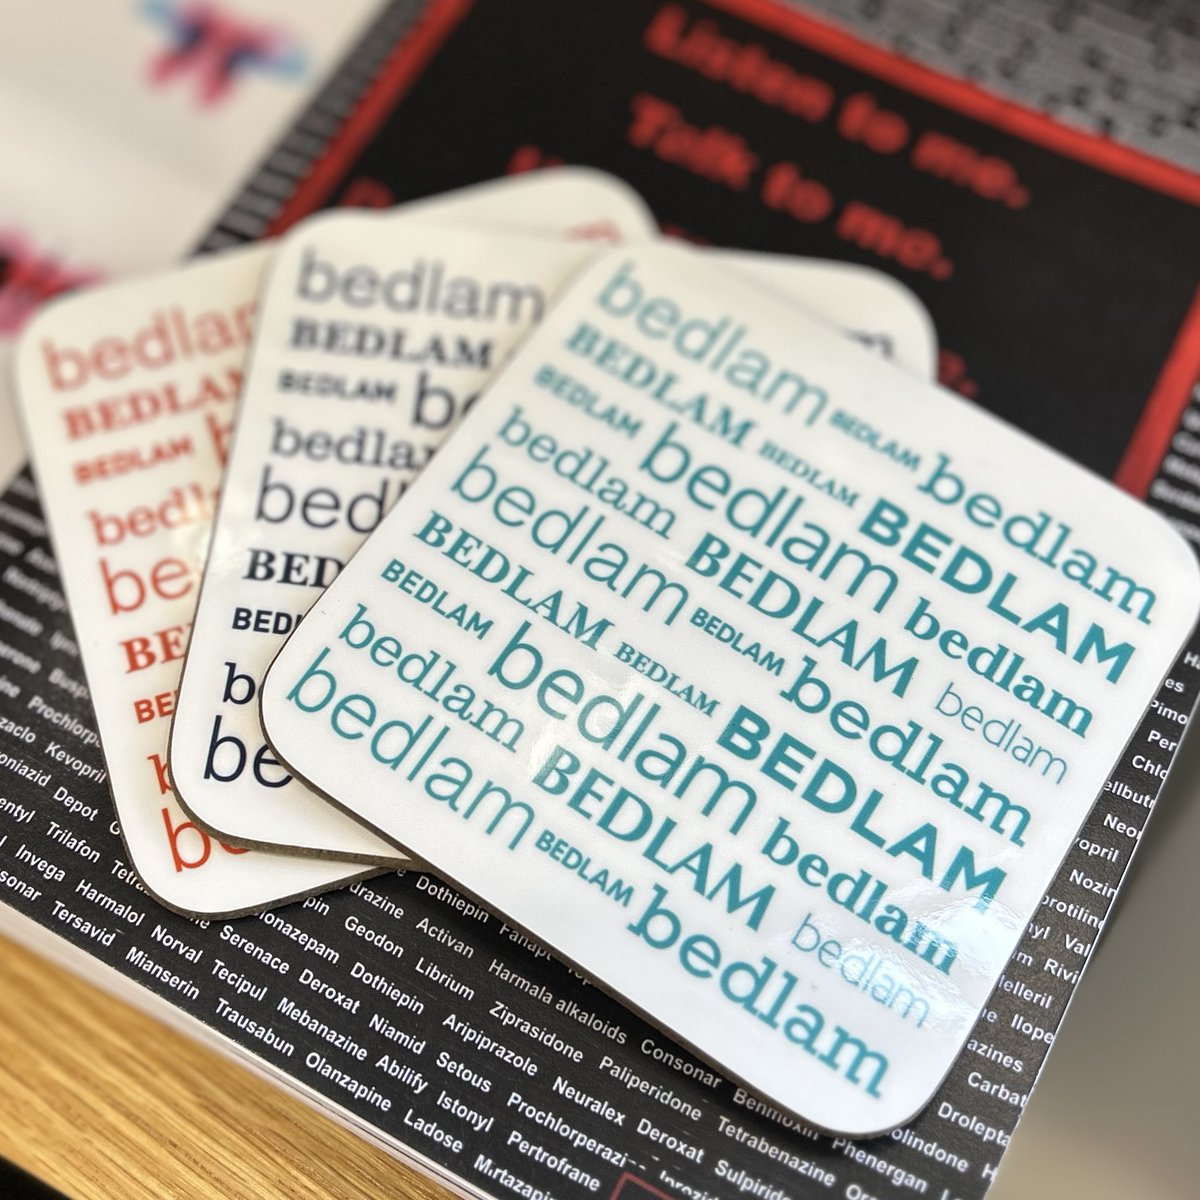 Ever find yourself saying 'it's Bedlam'? Bedlam is a medieval spelling variant for the name of the Hospital 'Bethlem'. Today it's a synonym for chaos and uproar. Bedlam coasters available in the Museum shop and online bit.ly/bedlam_coasters 🫖☕